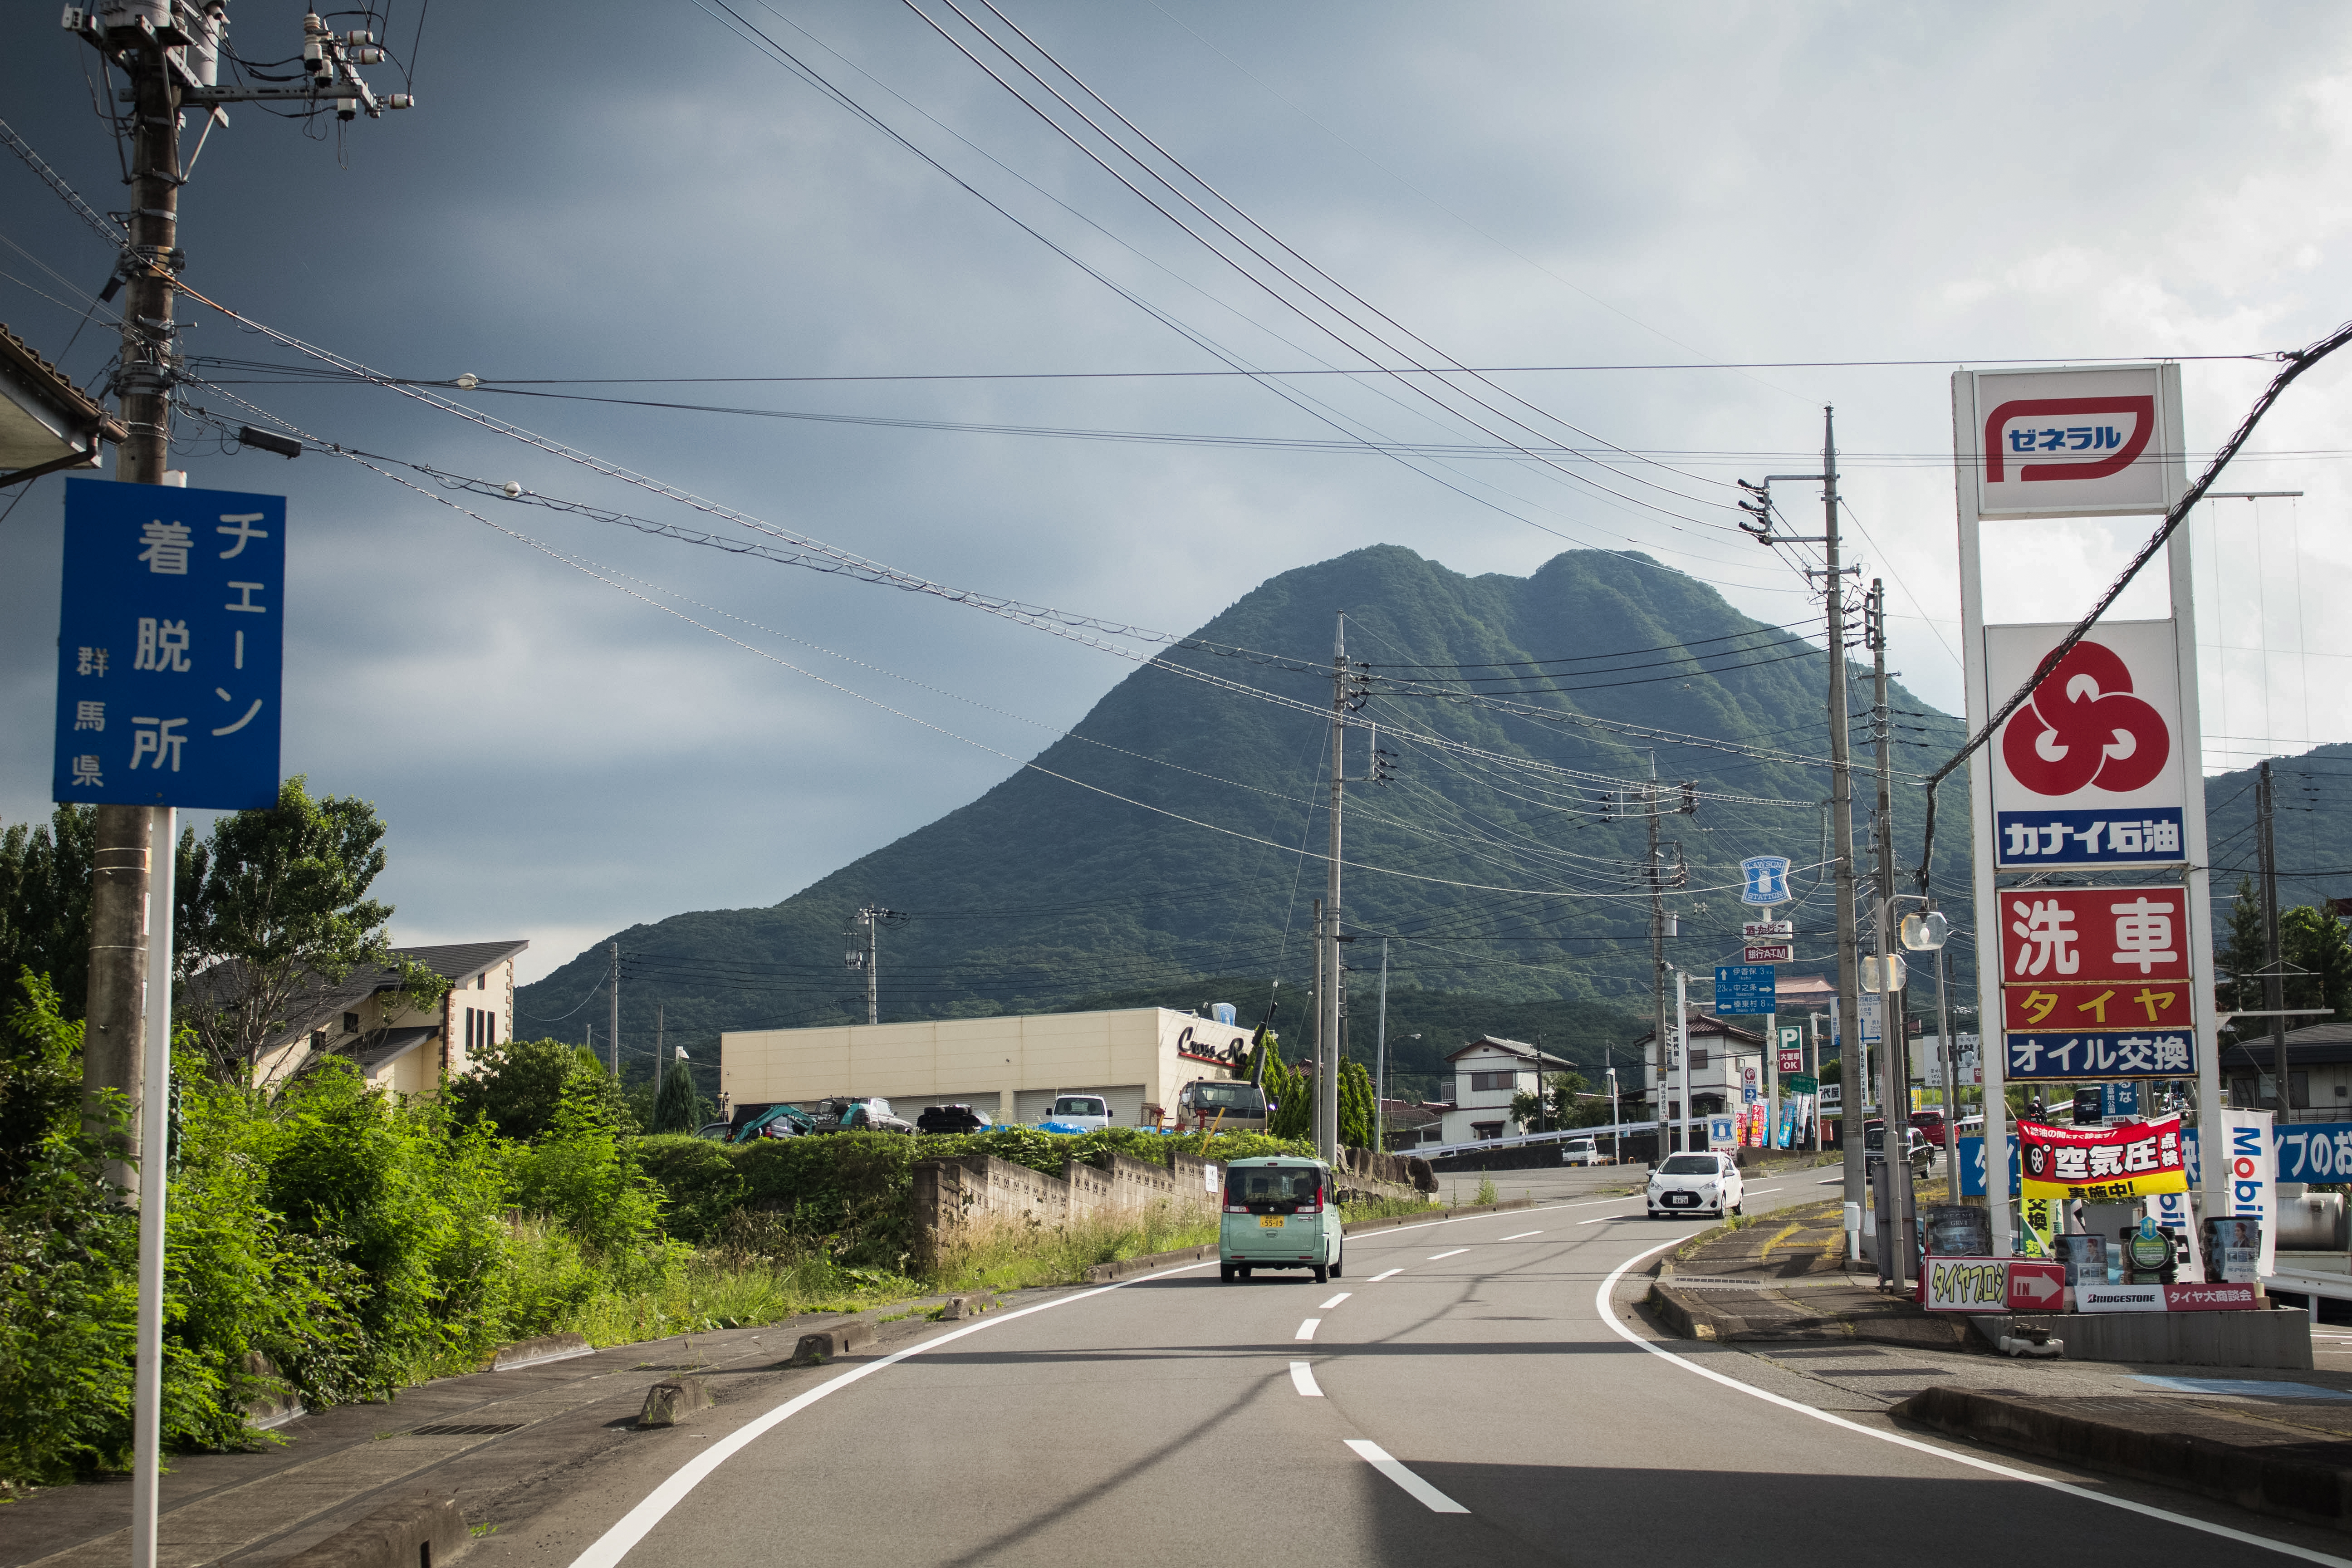 Day 13 – Initial D's Mt. Akina, Kyoto